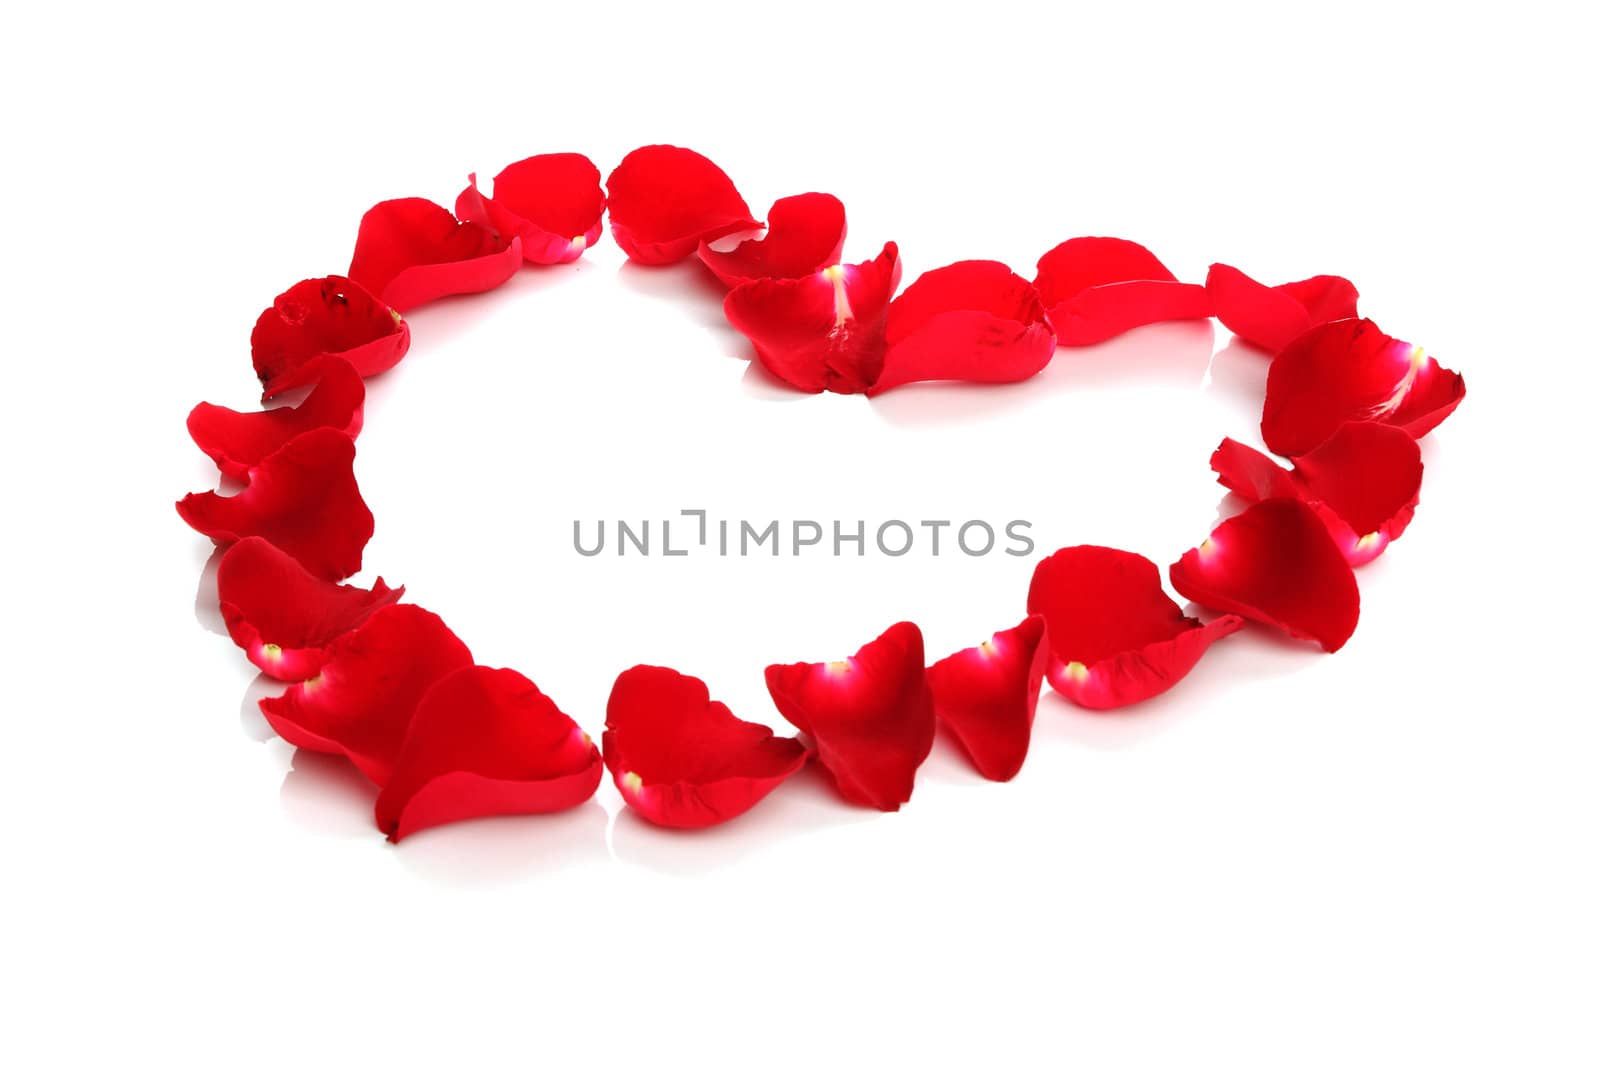 Beautiful heart of red rose petals by posterize